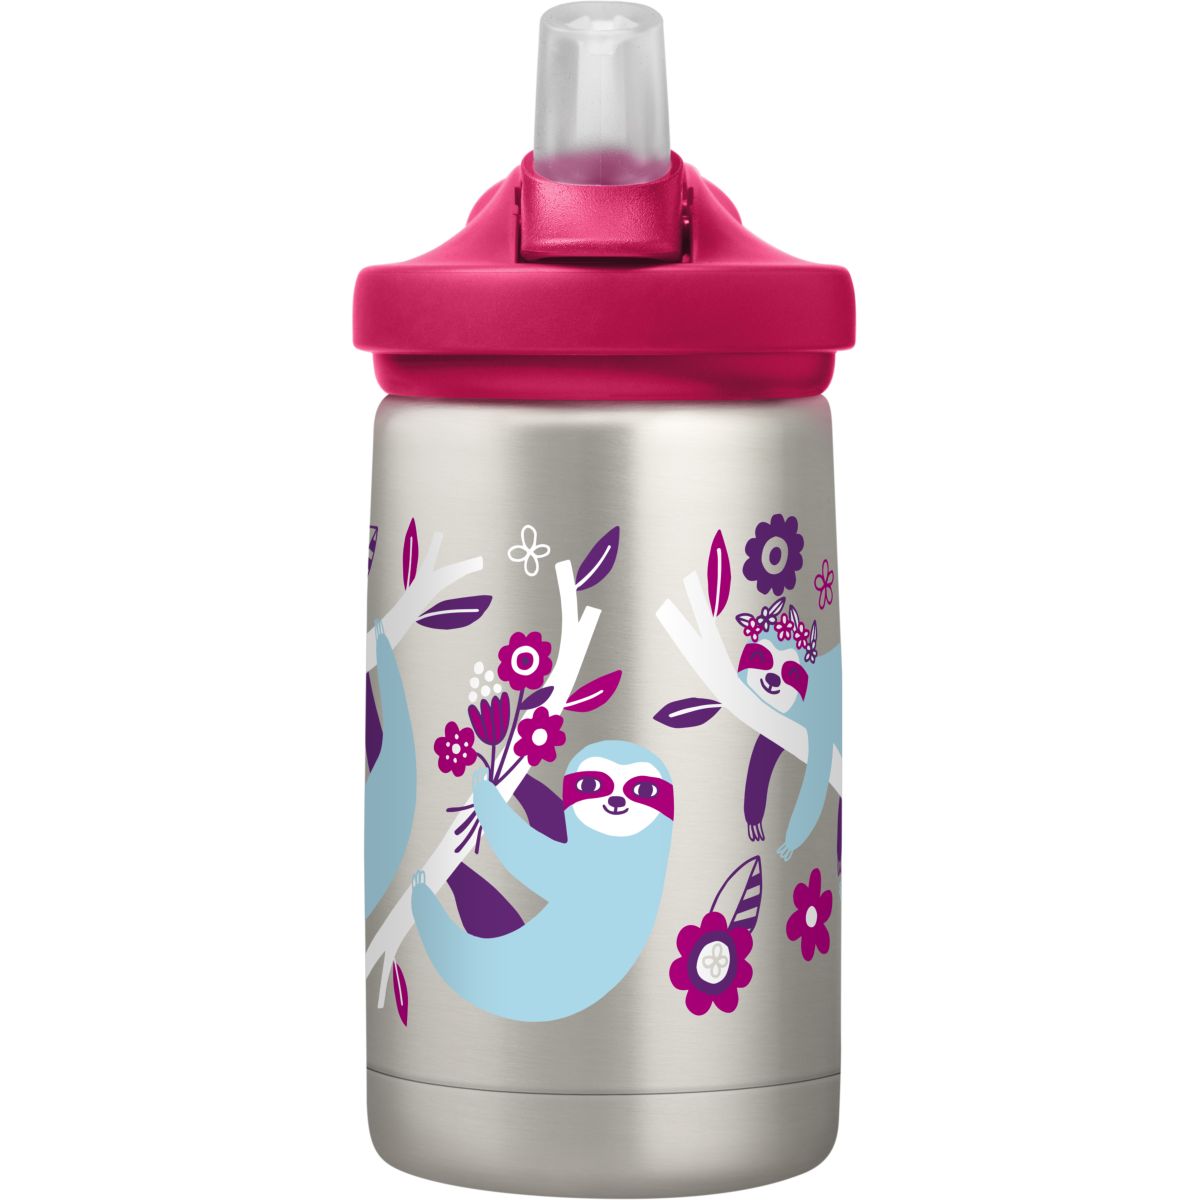 eddy+ Kids 12oz Insulated Stainless Steel Bottle